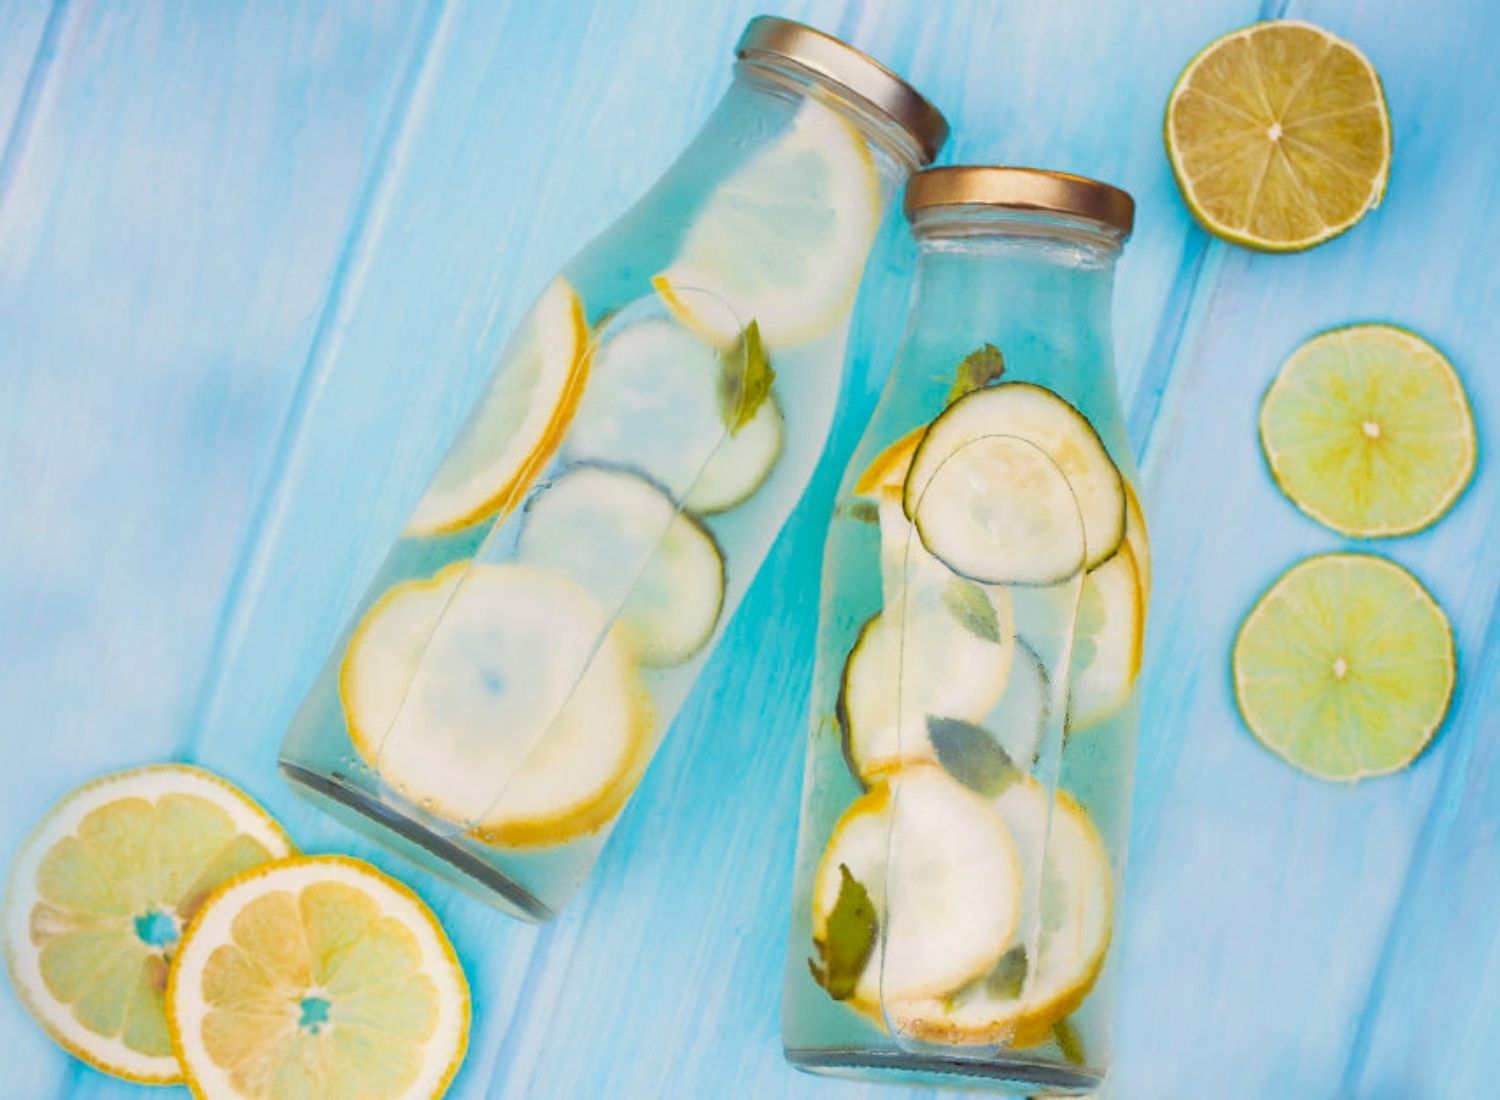 Drinking Lemon Water: Benefits And Side Effects